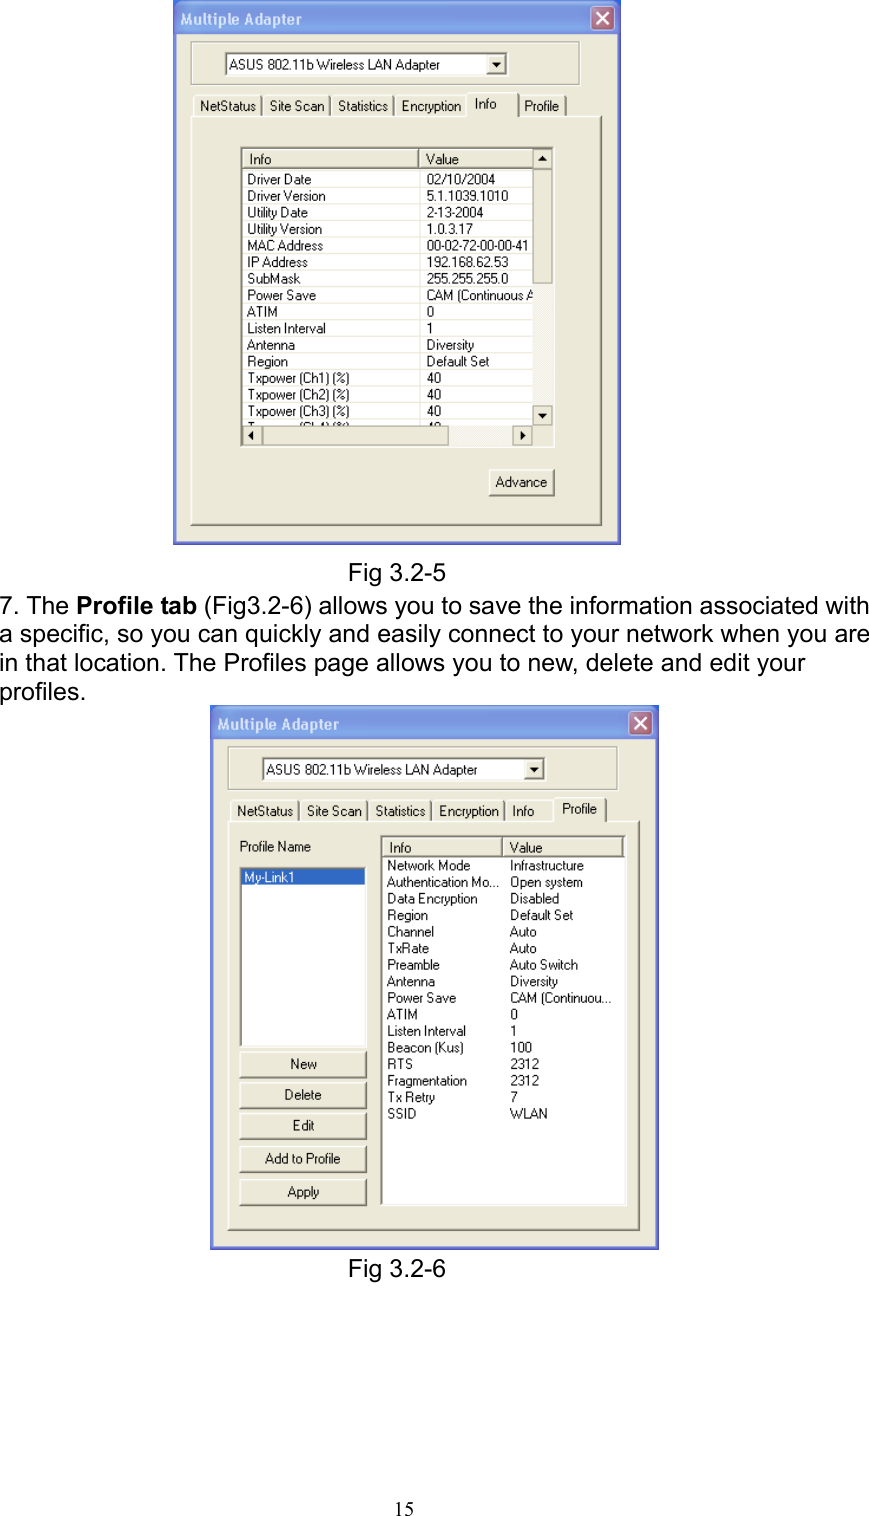   15   Fig 3.2-5 7. The Profile tab (Fig3.2-6) allows you to save the information associated with a specific, so you can quickly and easily connect to your network when you are in that location. The Profiles page allows you to new, delete and edit your profiles.  Fig 3.2-6  